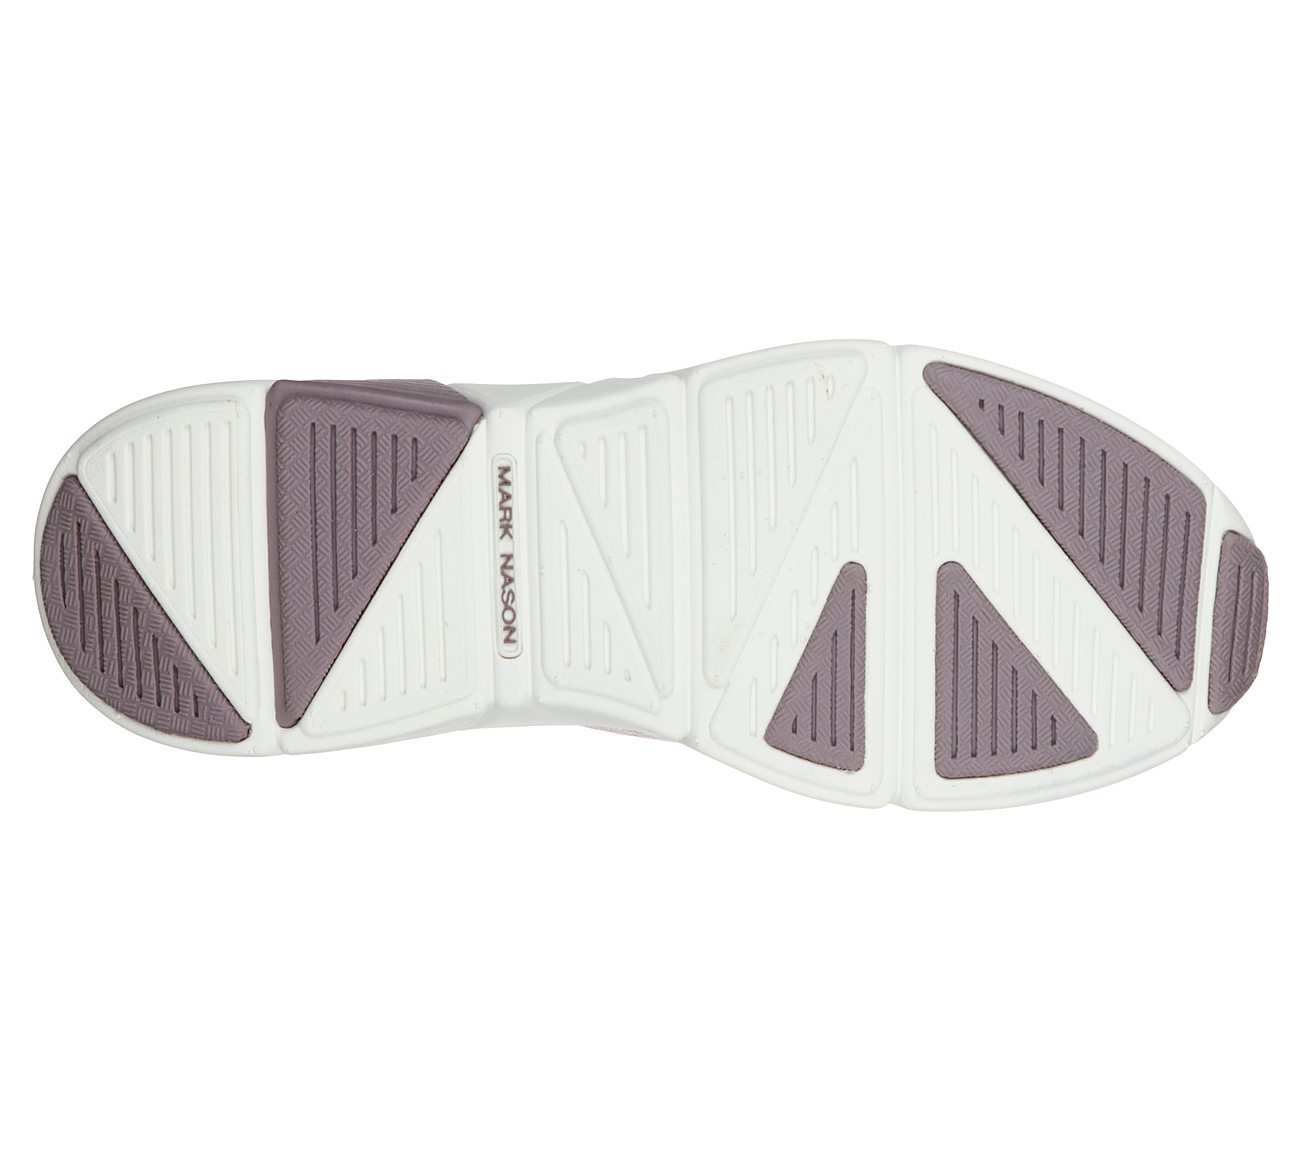 A-LINE - POINTE, LILAC Footwear Bottom View